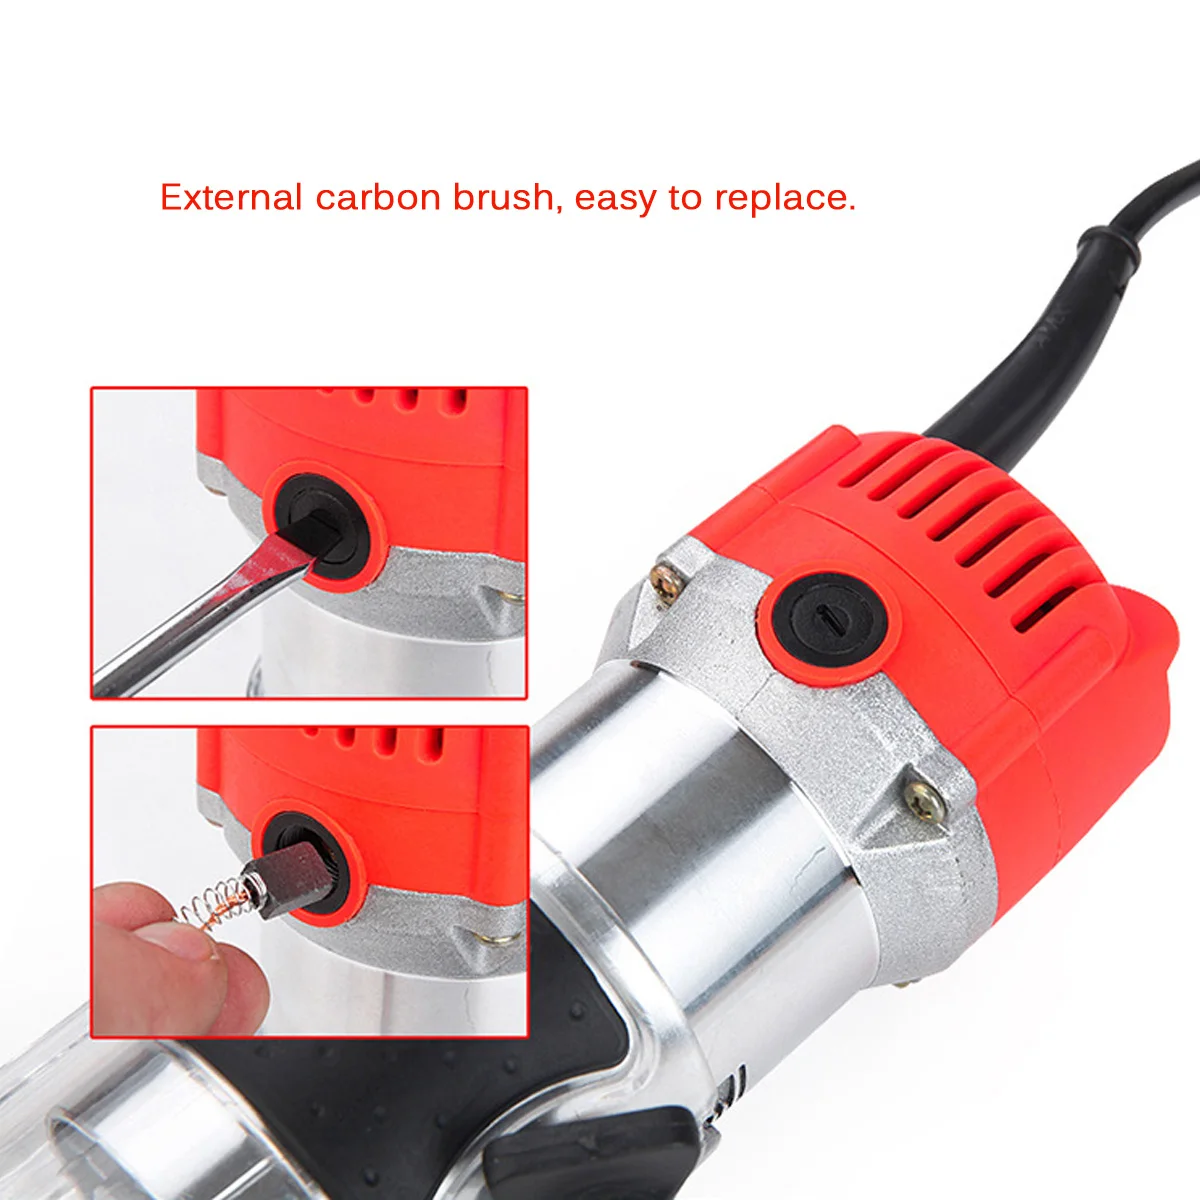 220V 300W Trim Router Set Edge Woodworking Wood Clean Cuts Power Cutting Tool 